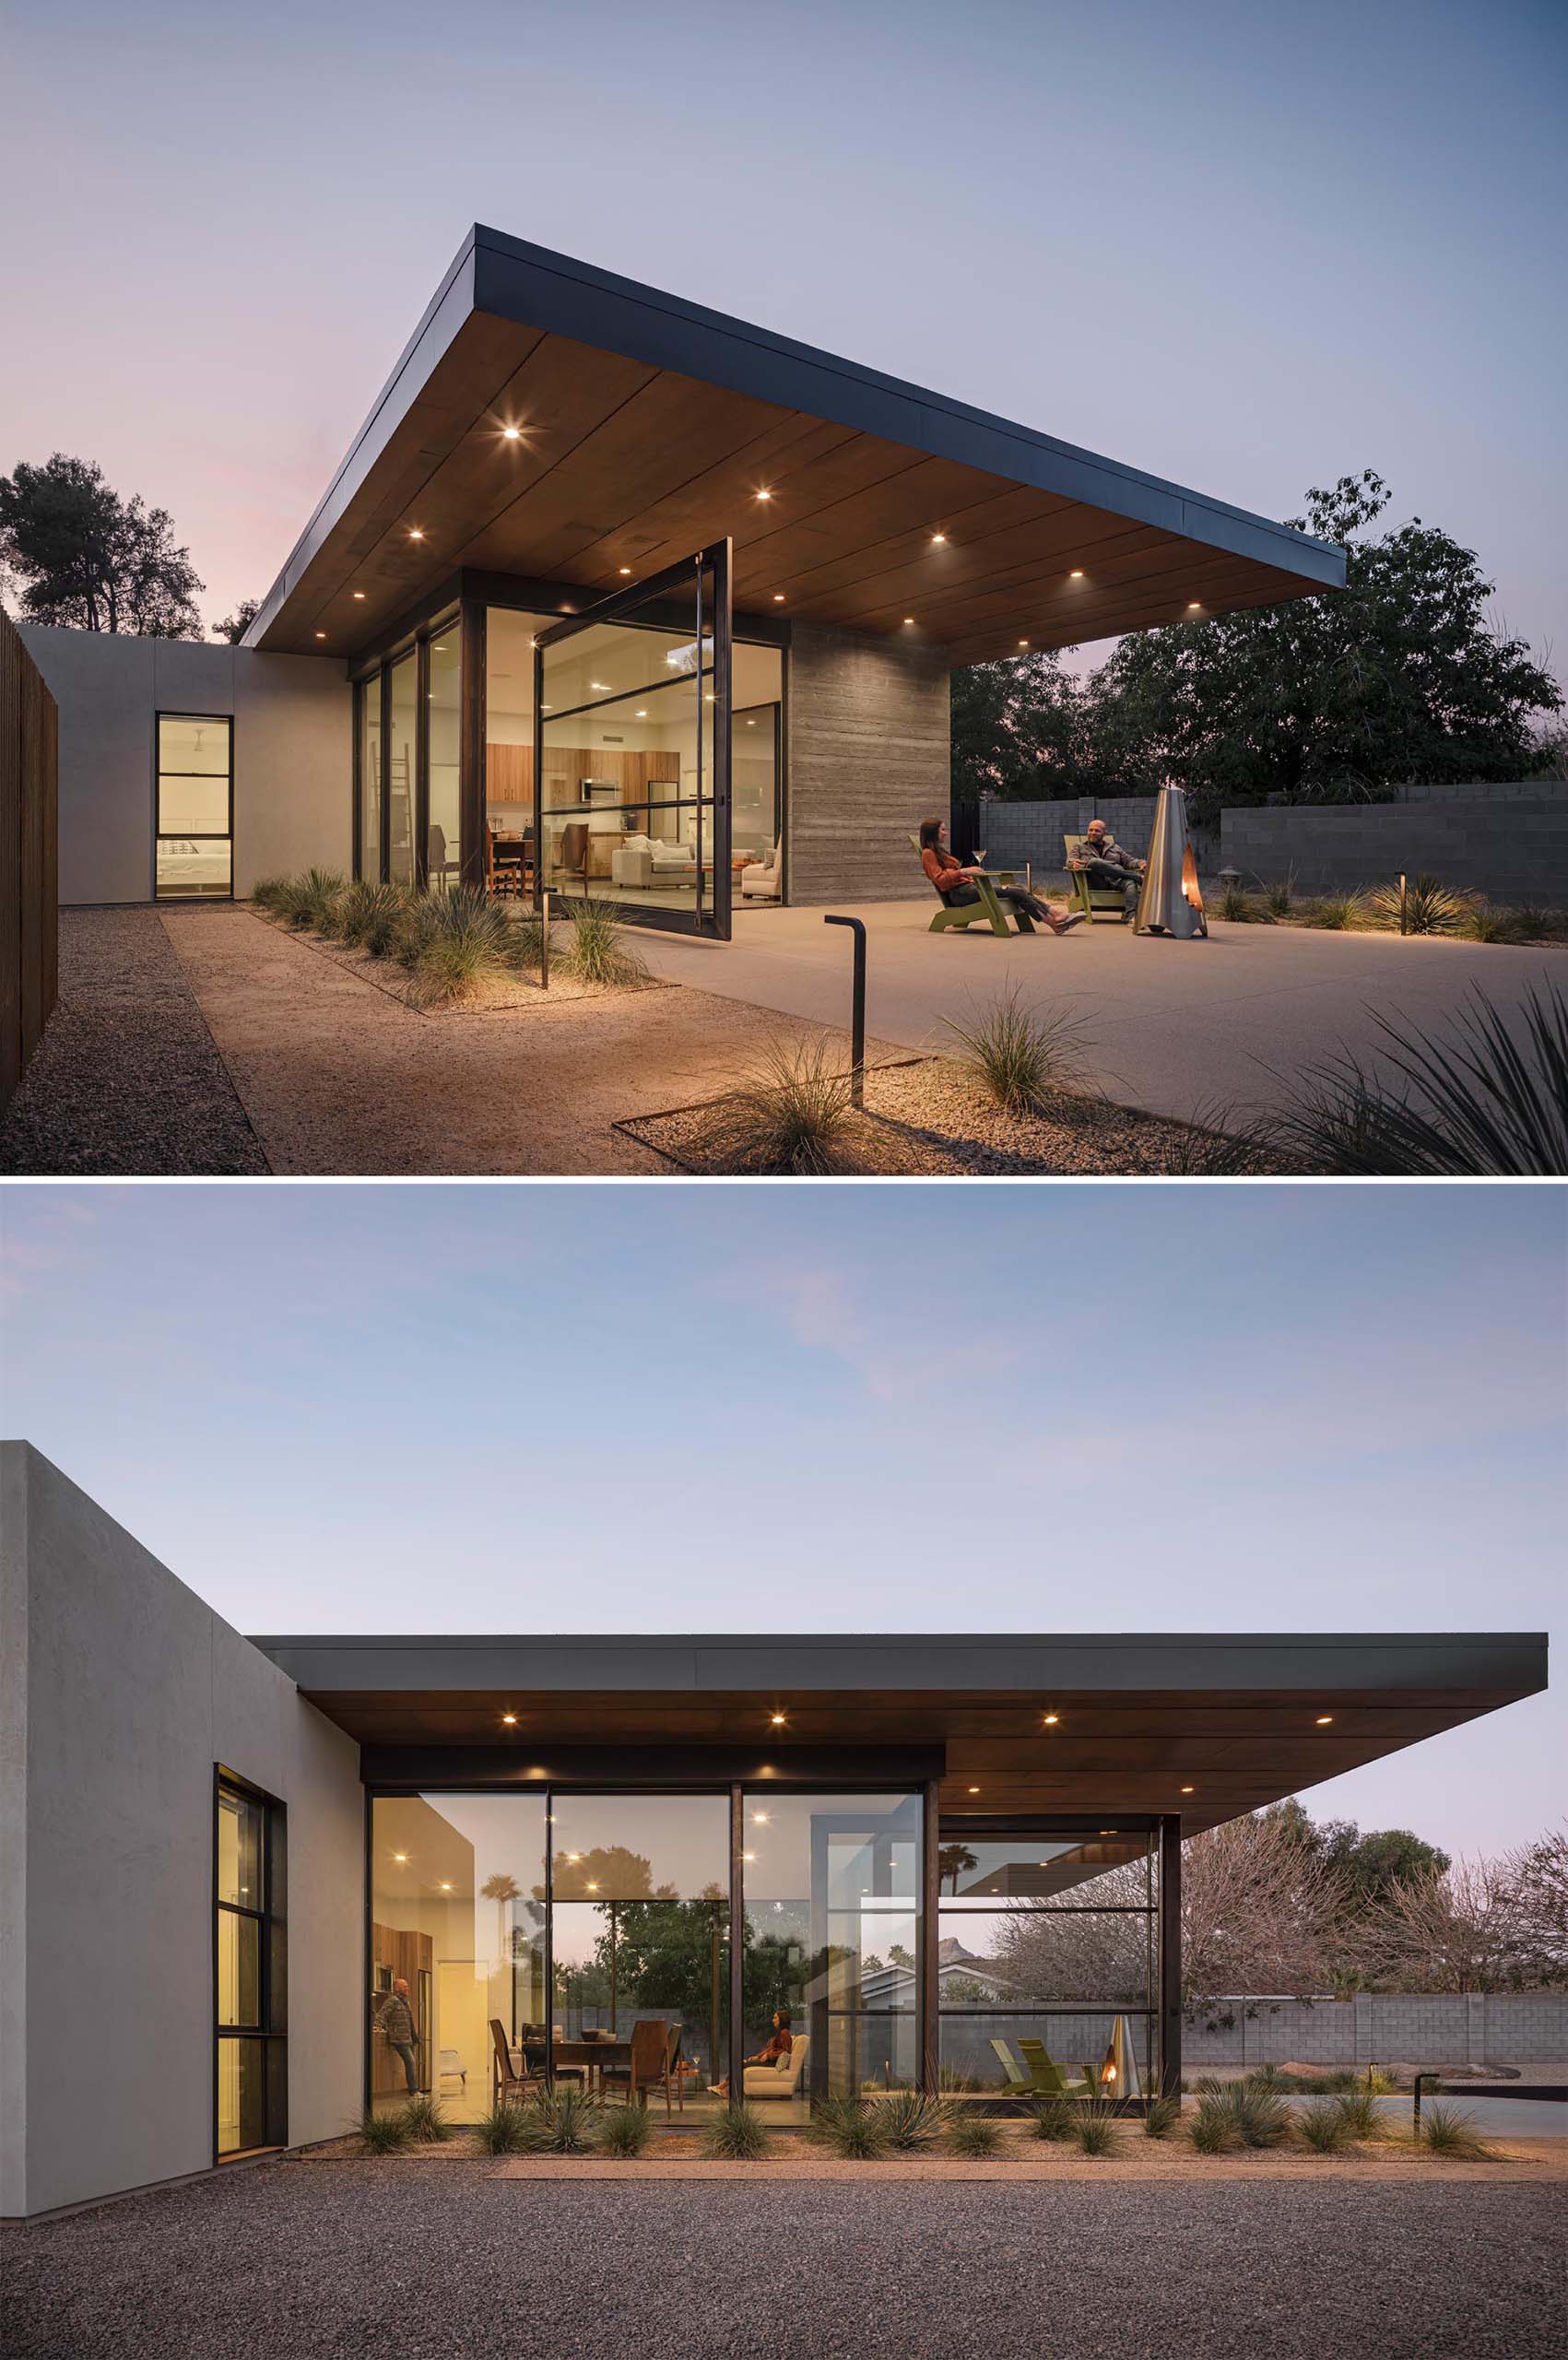 The 12 foot wide pivoting glass door of this small and modern home connects the interior spaces to the patio.